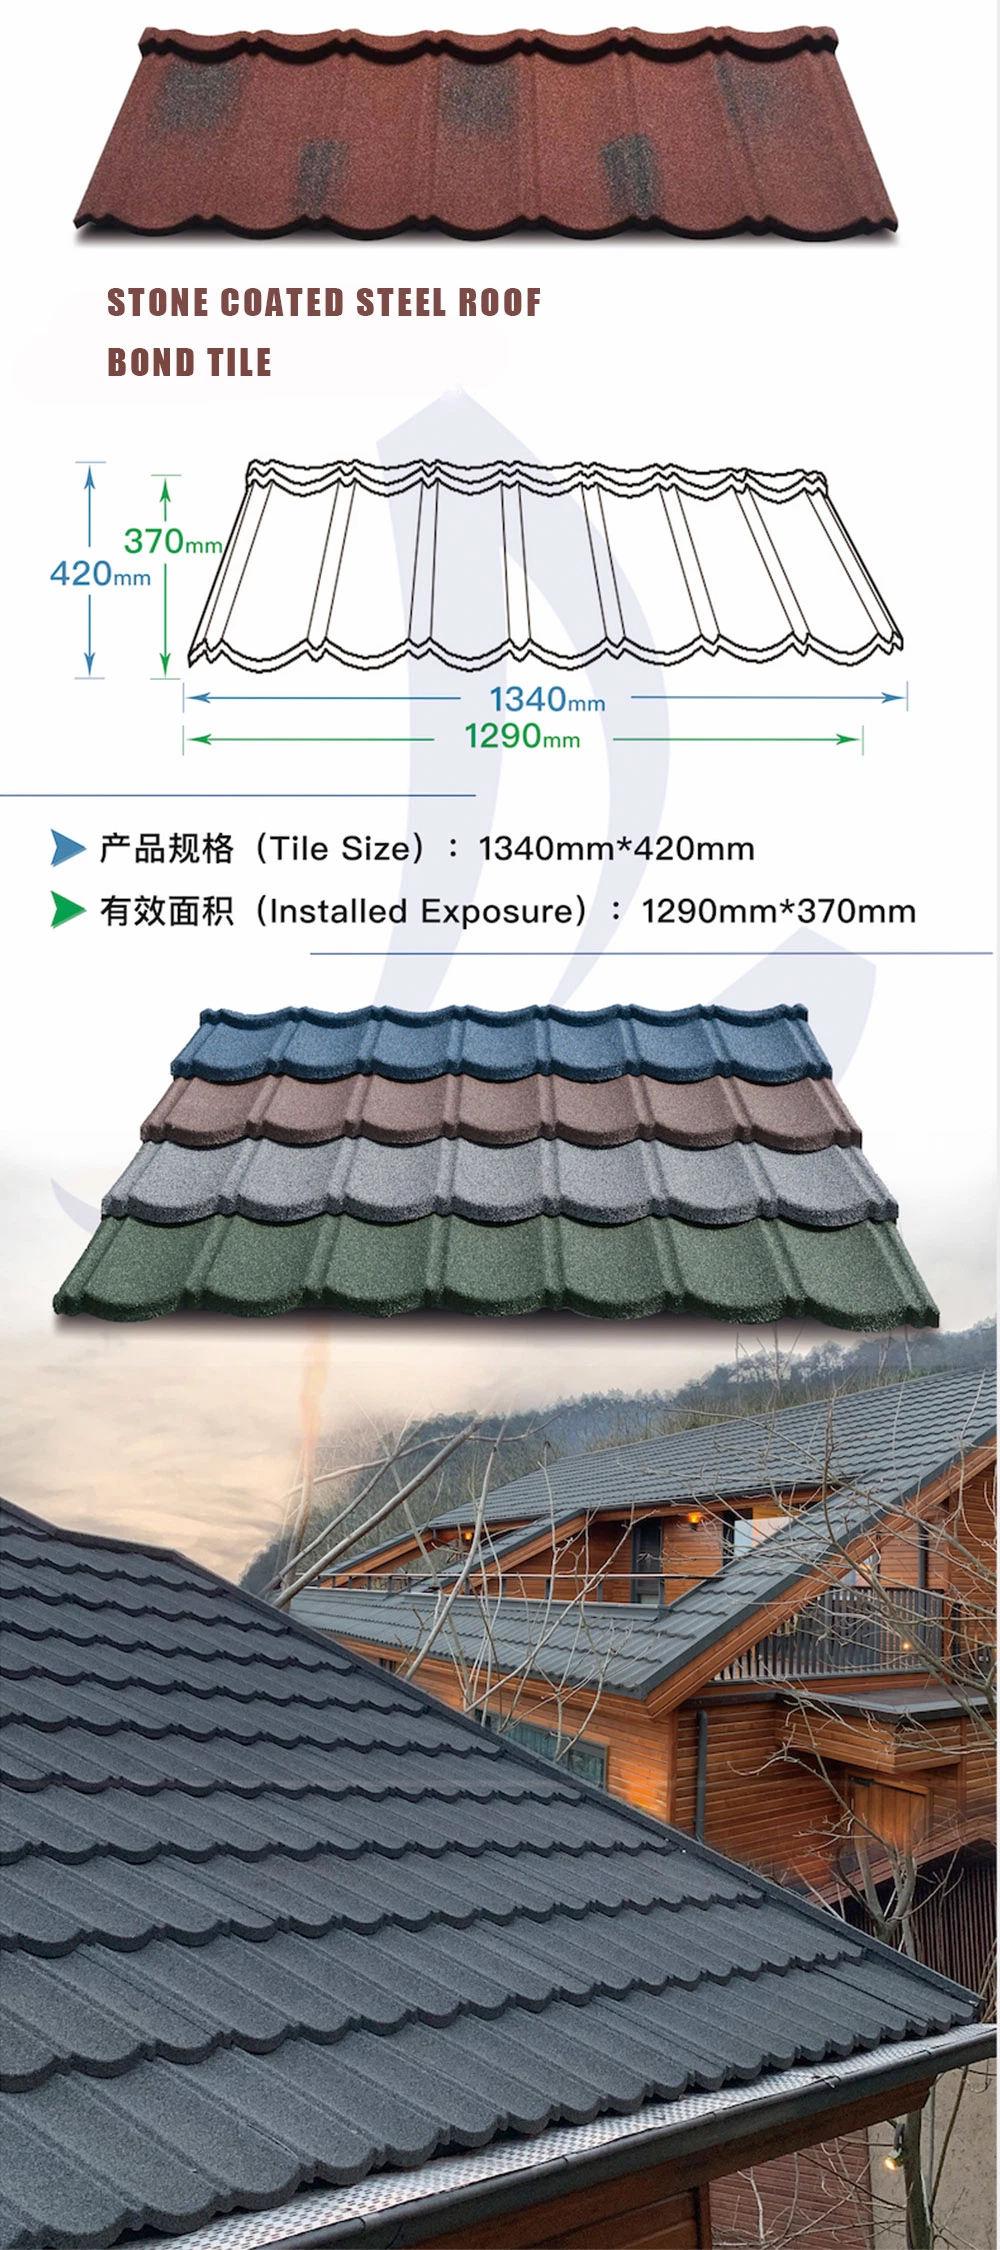 50 Years Crack Resist Steel Roofing Shingles Stone Coated Corrugated Roofing Tile